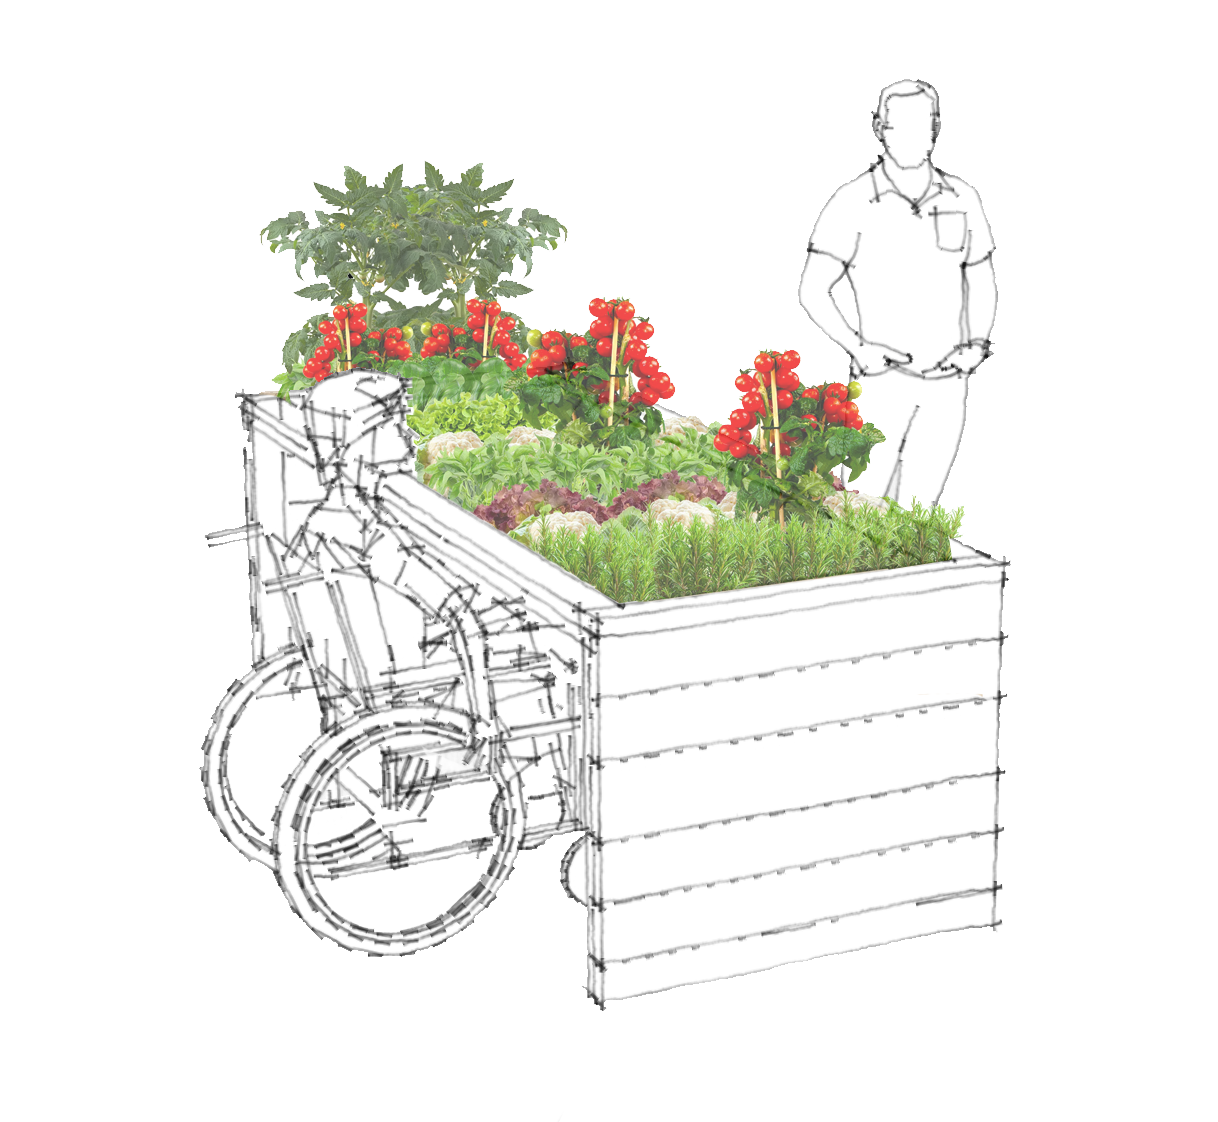 An illustration of an accessible raided garden bed.